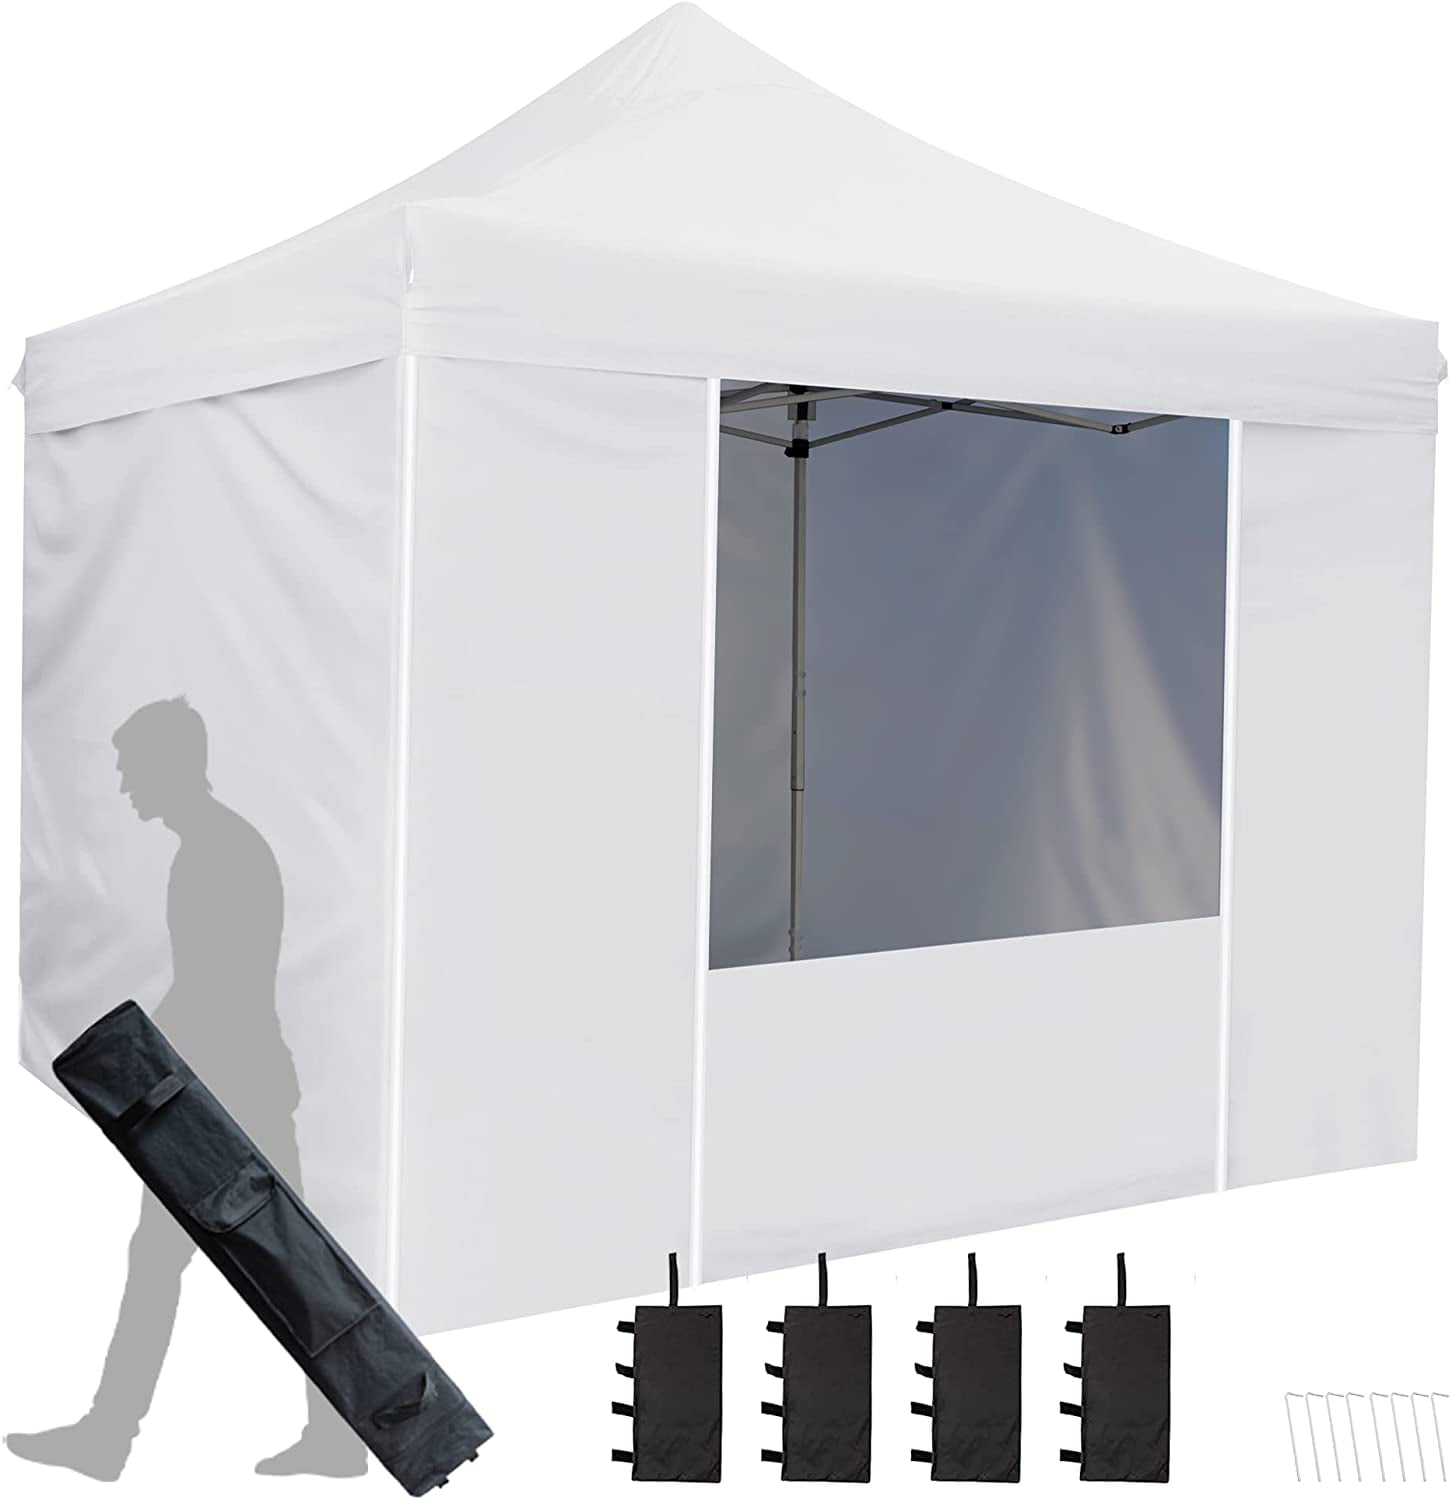 AsterOutdoor 10' x 10' Pop Up Sidewall Canopy Tent - 5 pieces of sidewall  with Rolling Storage Bag, White